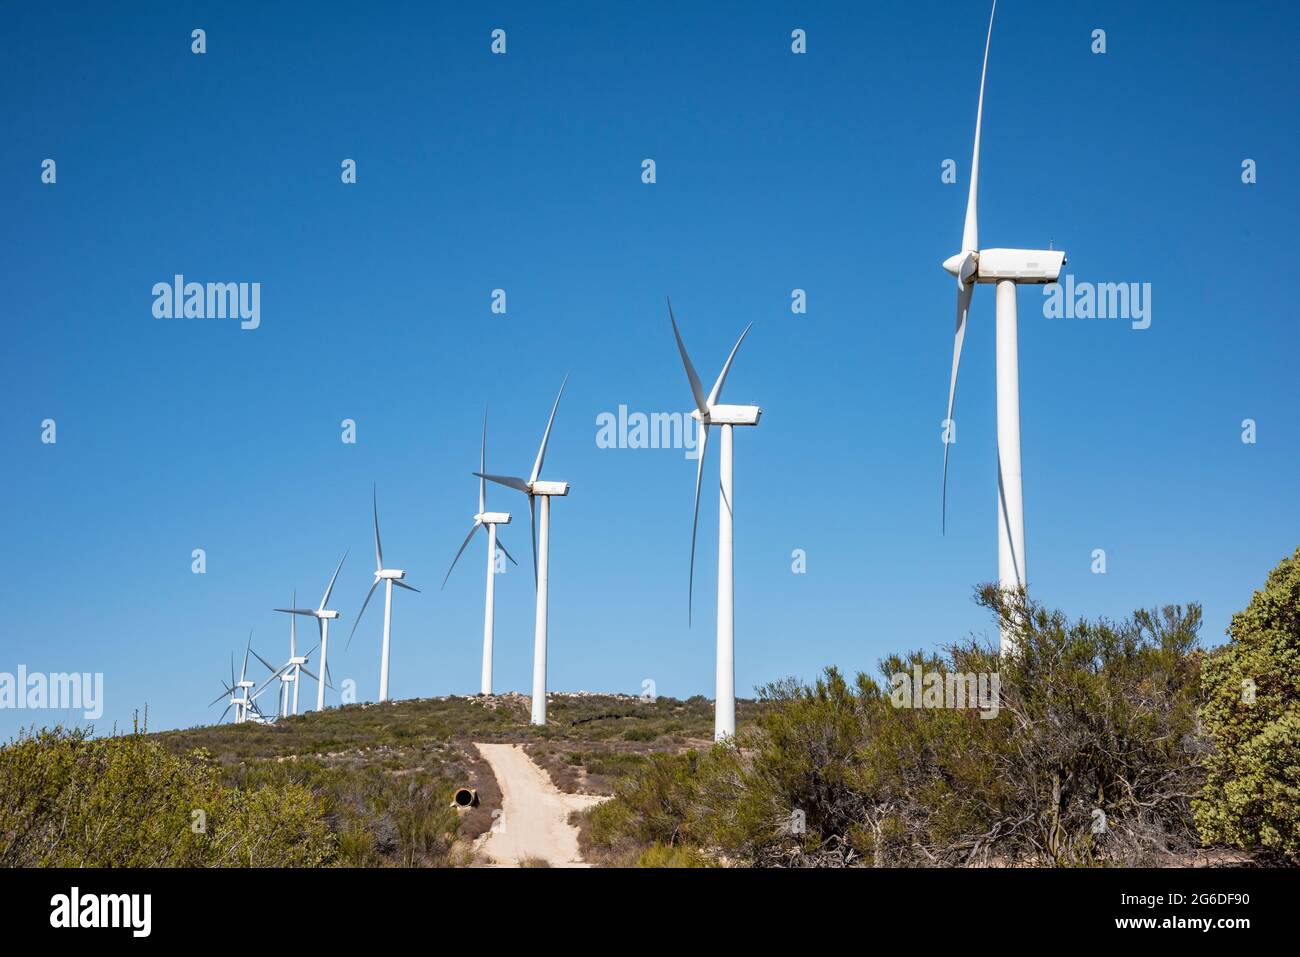 Kumeyaay wind power project electricity generating wind turbime farm, at Tecate Divide, Southern California Stock Photo